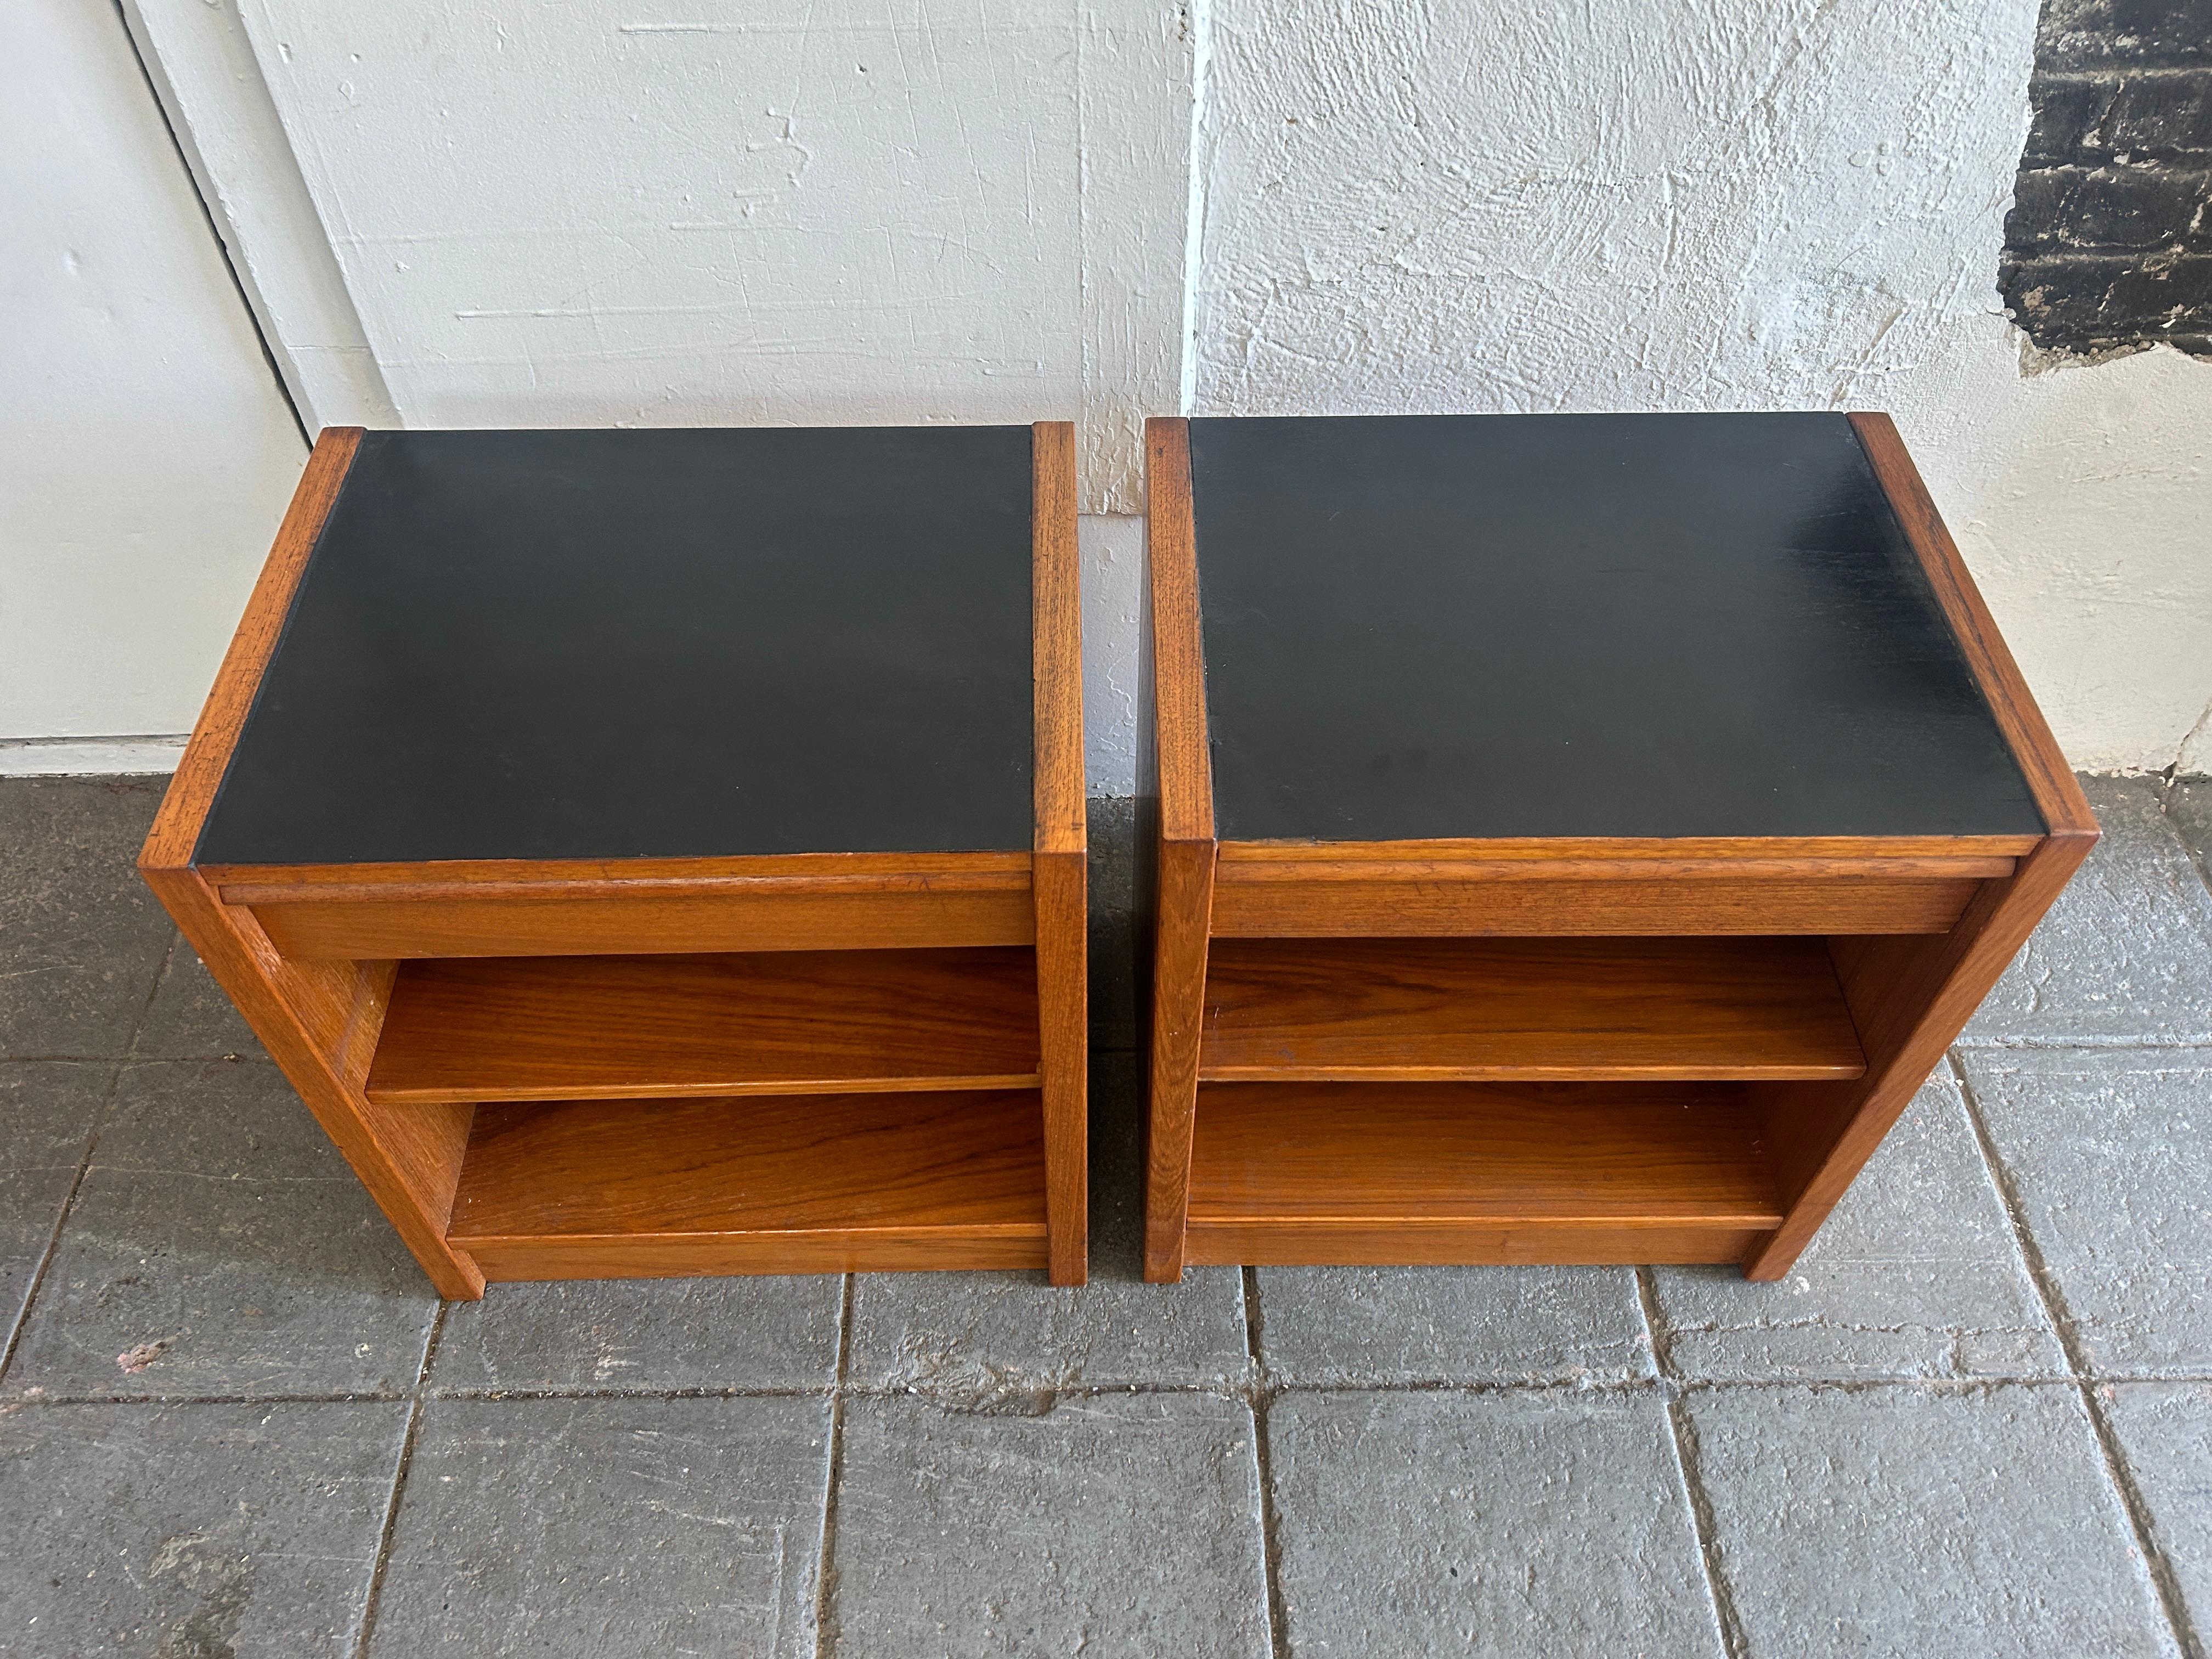 Pair of teak danish modern nightstands with single drawer and adjustable shelf. Great simple block style Danish nightstands or end tables. Tops are black lacquer on teak. Each nightstand has a single drawer with a single lower shelf that is